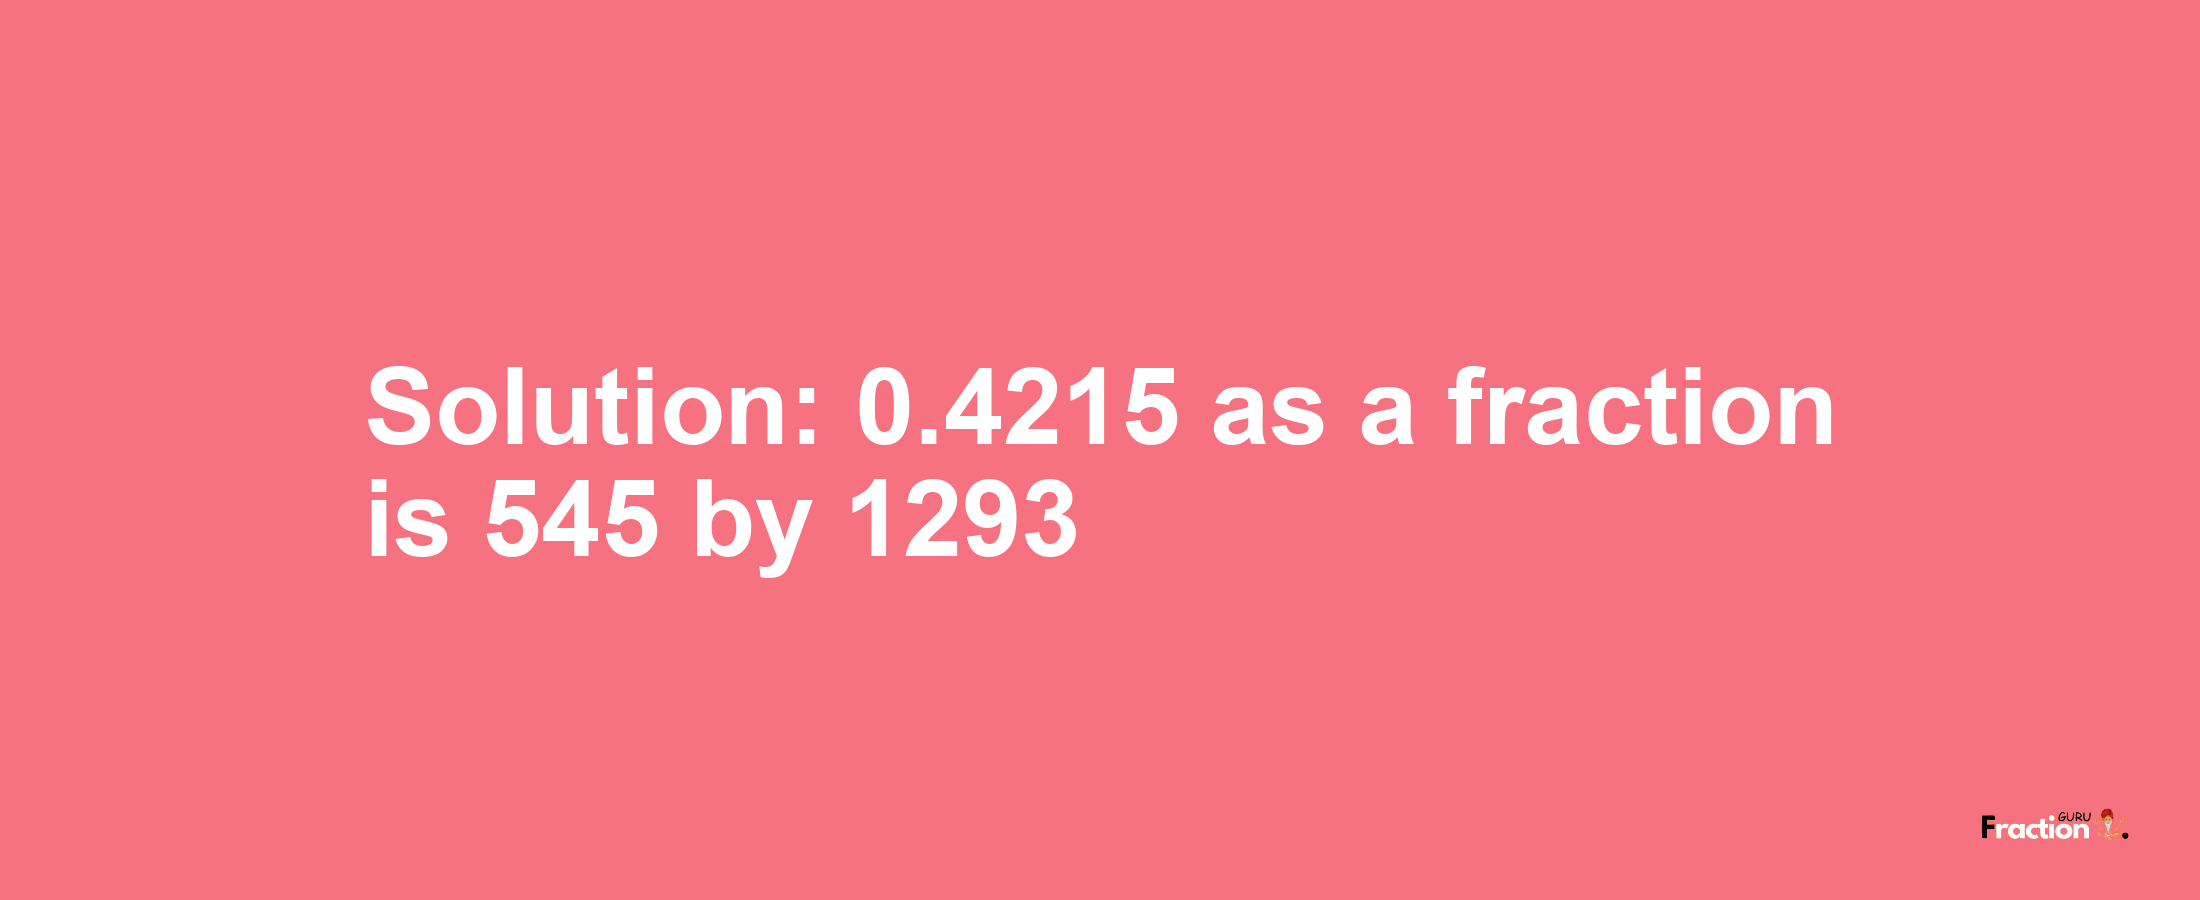 Solution:0.4215 as a fraction is 545/1293